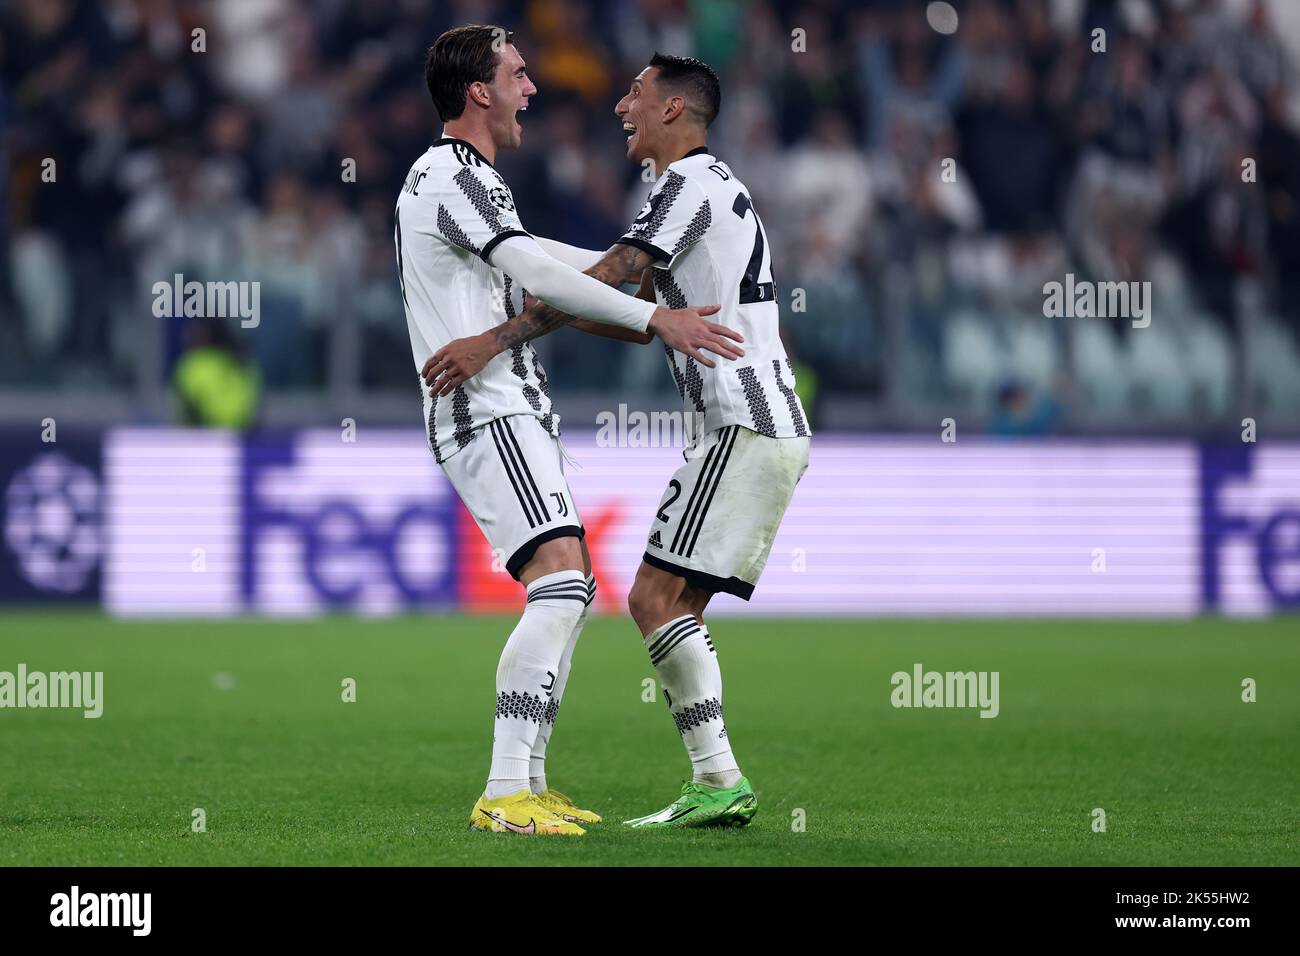 Turin, Italy. 05/10/2022, Dusan Vlahovic of Juventus Fc  (L) celebrates after scoring a goal with his team mate Angel Di Maria (R) during the Uefa Champions League Group H football match between Juventus and Maccabi Haifa FC at Allianz Stadium on October 5, 2022 in Turin, Italy. Stock Photo